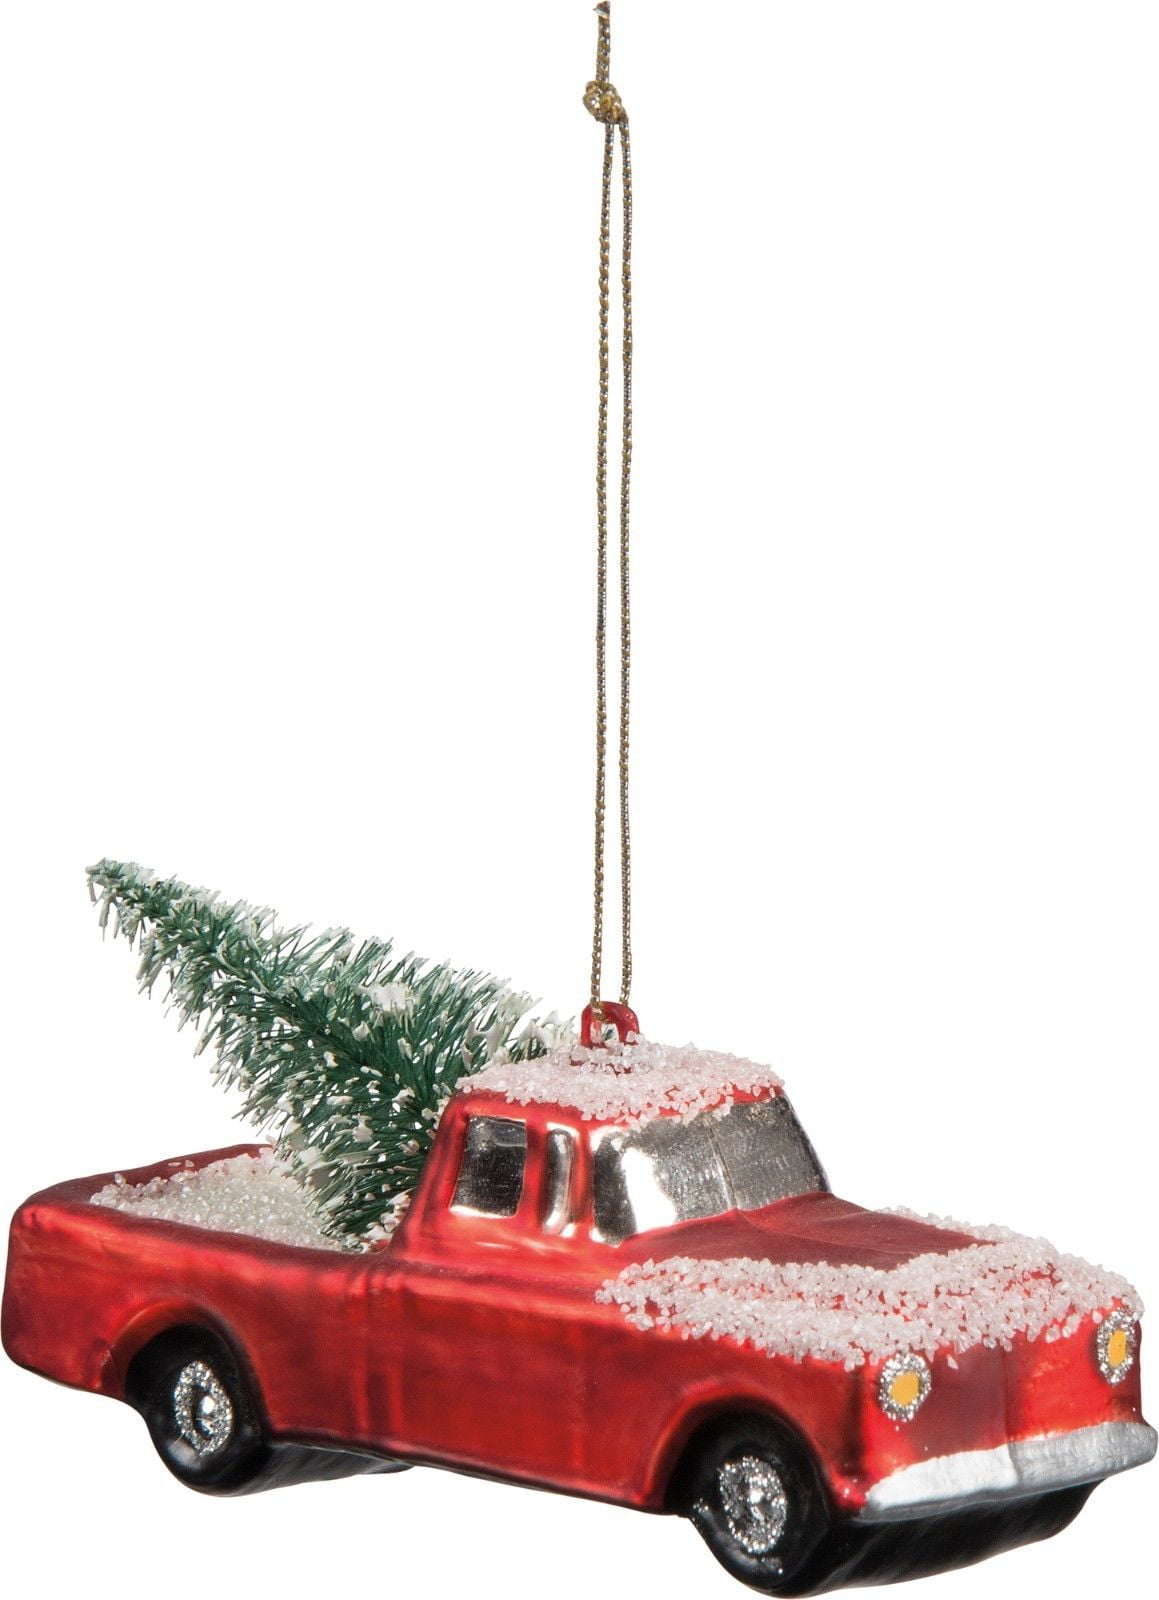 3dRose wb_263636_1 Have a Holly Jolly Red Truck with Christmas Trees Water Bottle